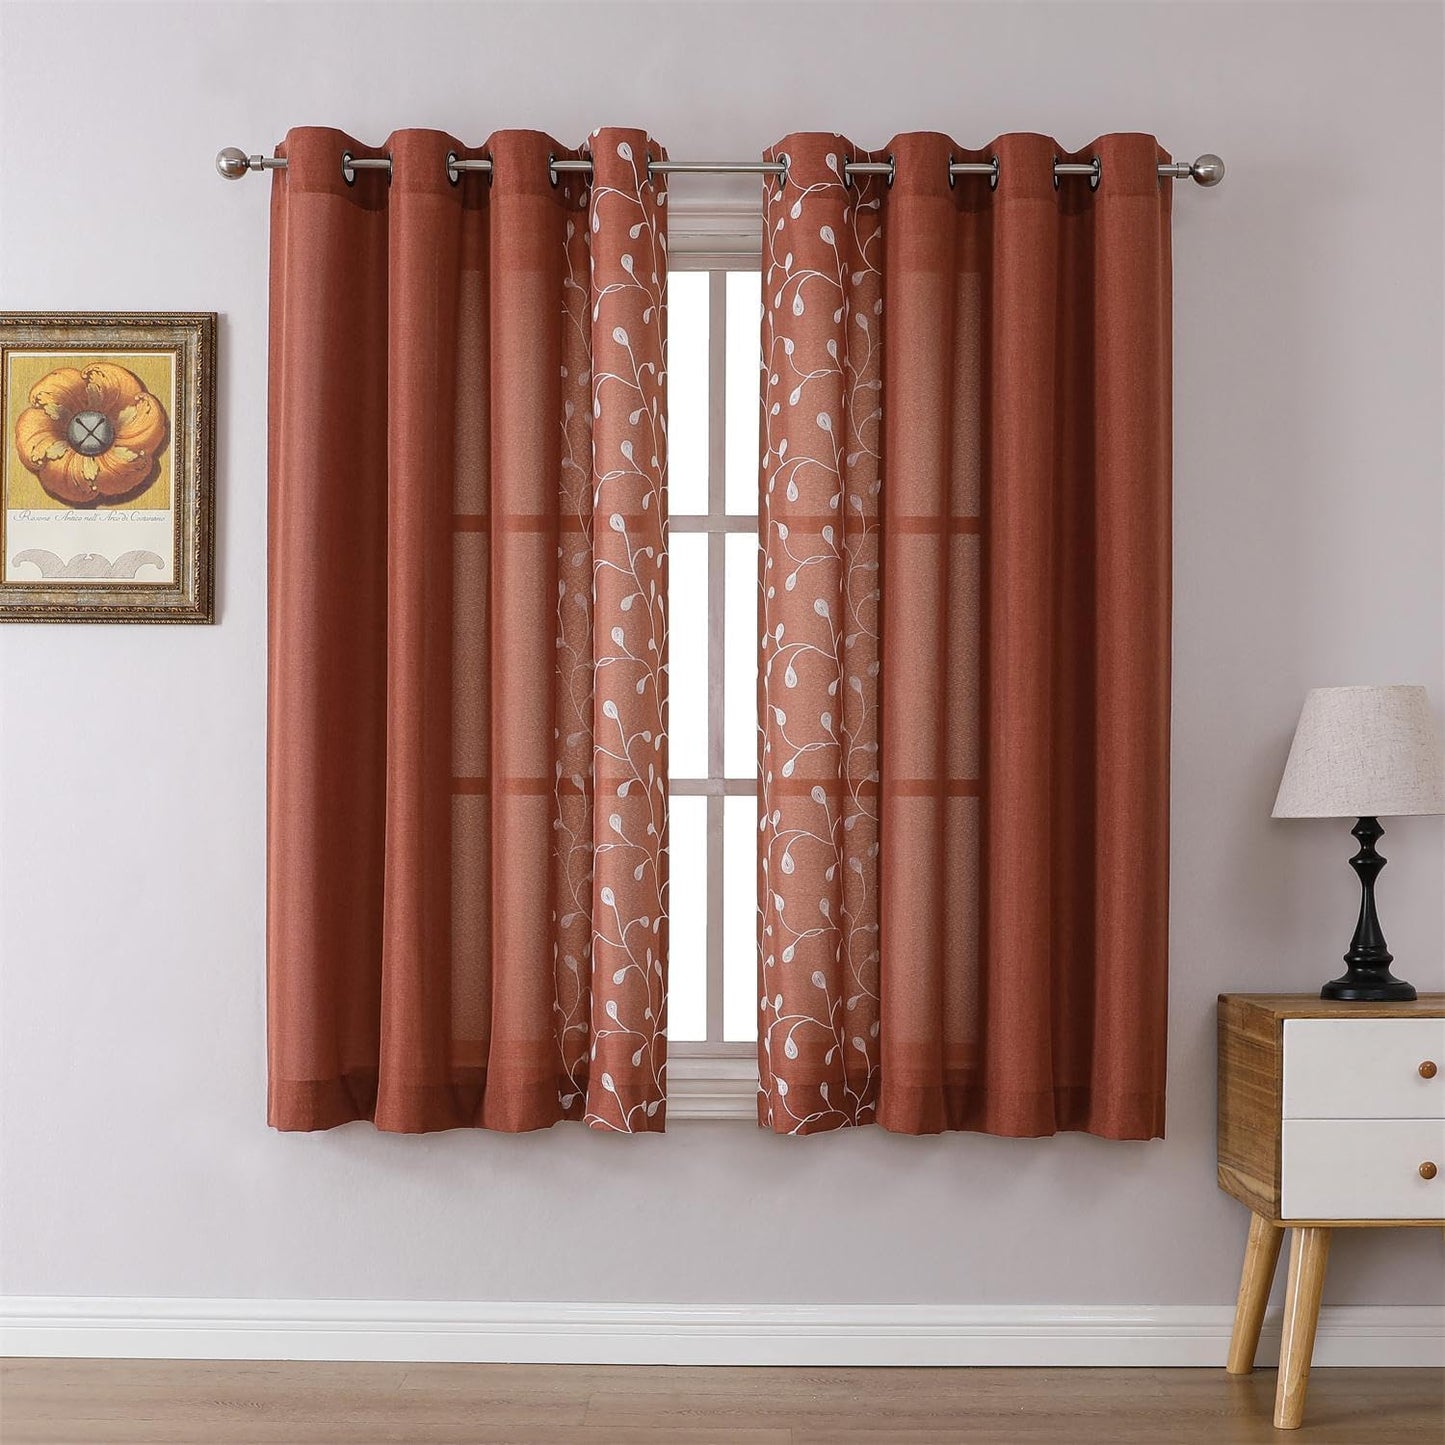 MIUCO Floral Embroidered Semi Sheer Curtains Faux Linen Grommet Curtains for Girls Room 52 X 84 Inch Set of 2, off White  MIUCO Mix  Match - Rust 52X63 Inch 